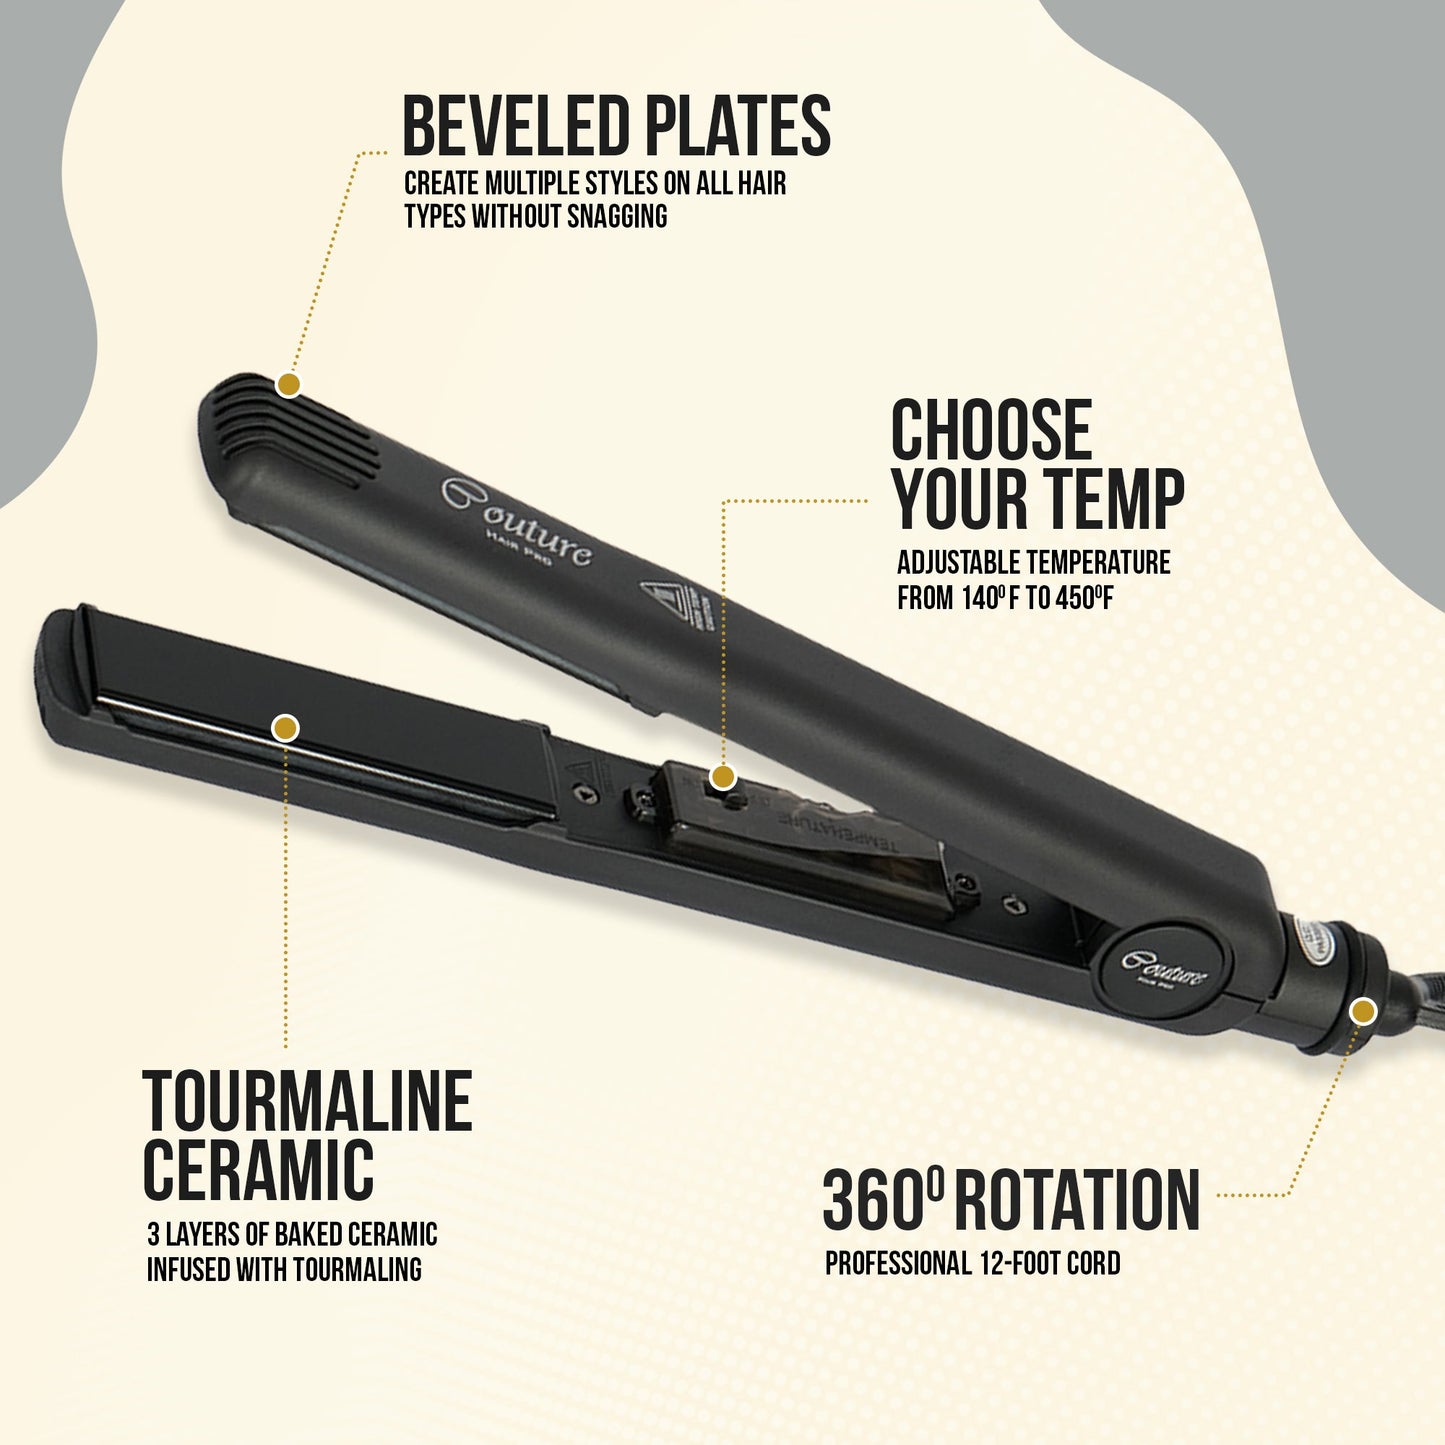 Couture Hair Pro Classic Hair Straightener 1'' - Black - Couture Hair Pro